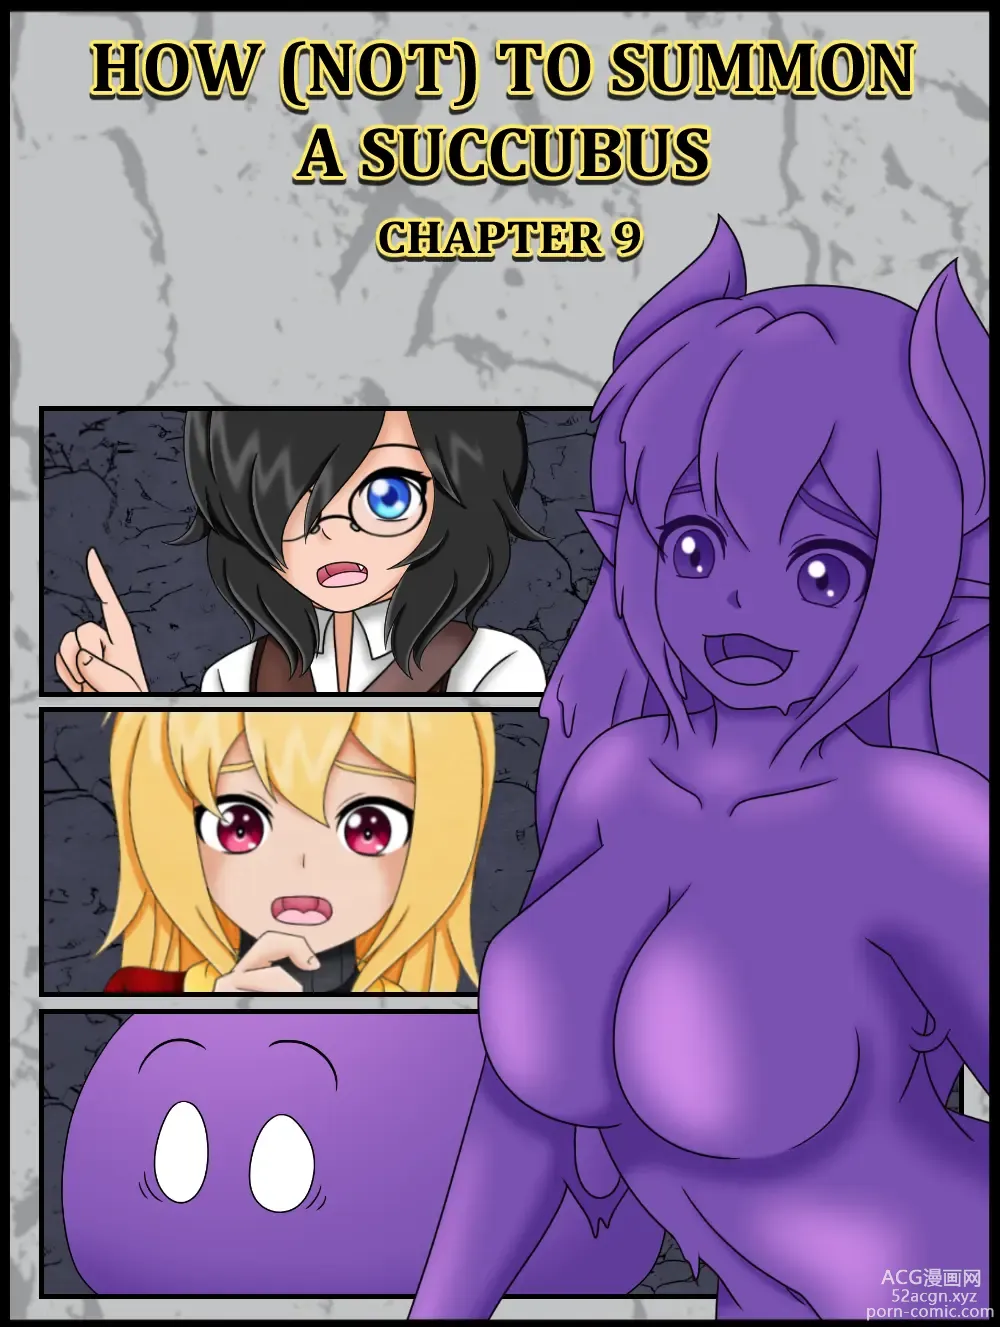 Page 1 of doujinshi How (Not) to Summon a Succubus chapter_9